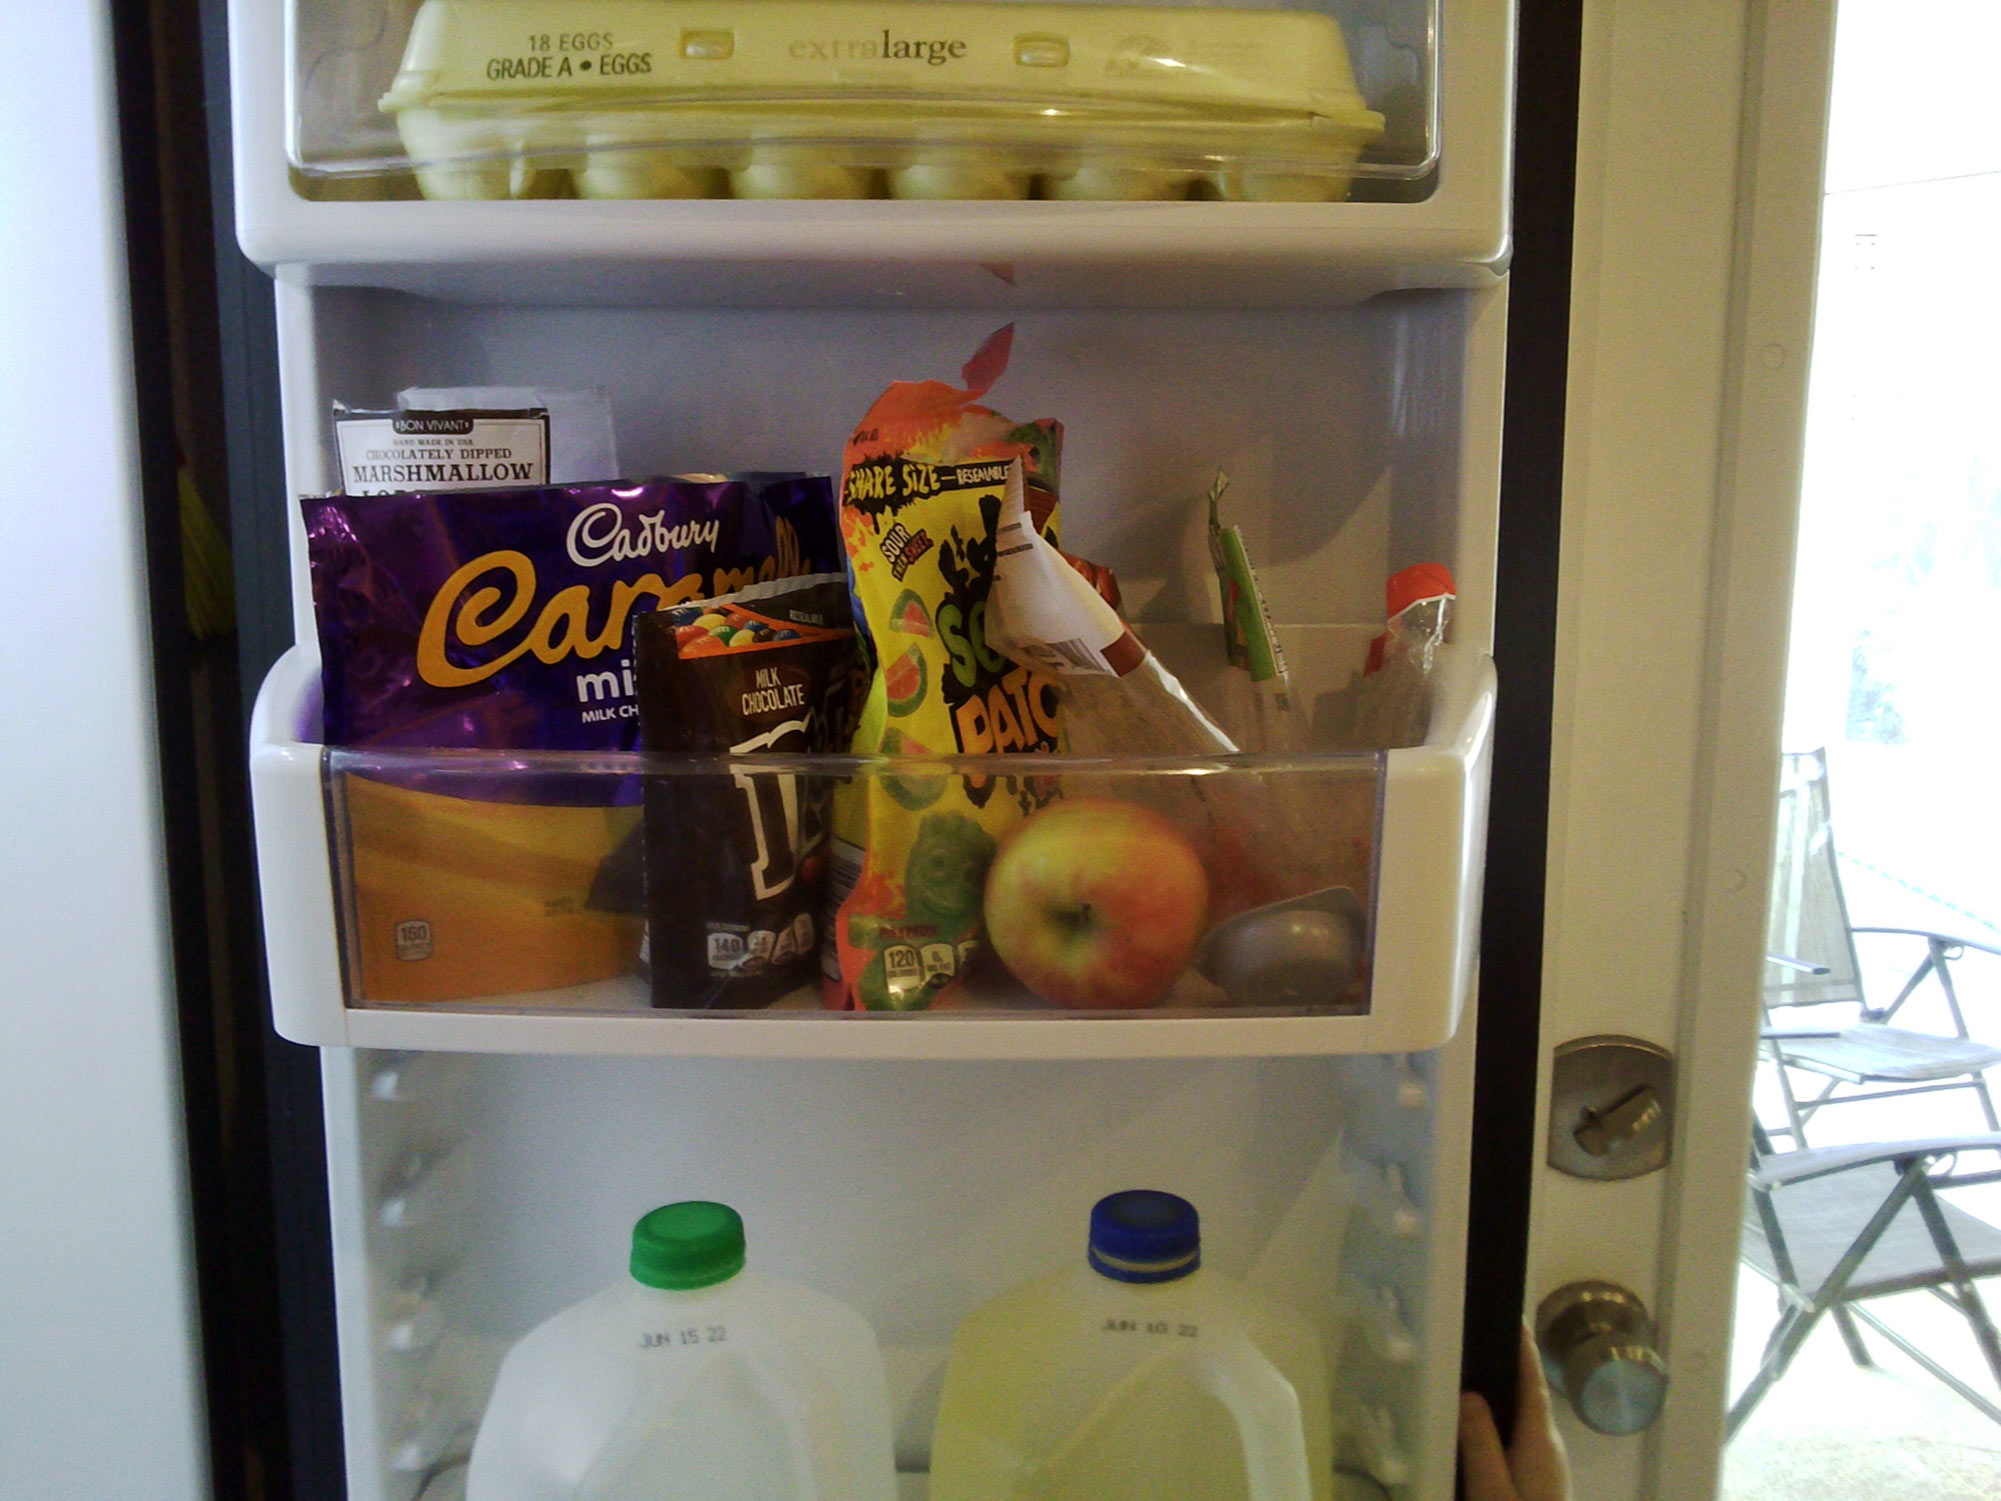 The inside of a fridge door, showing lots of sugar y snacks and a single apple